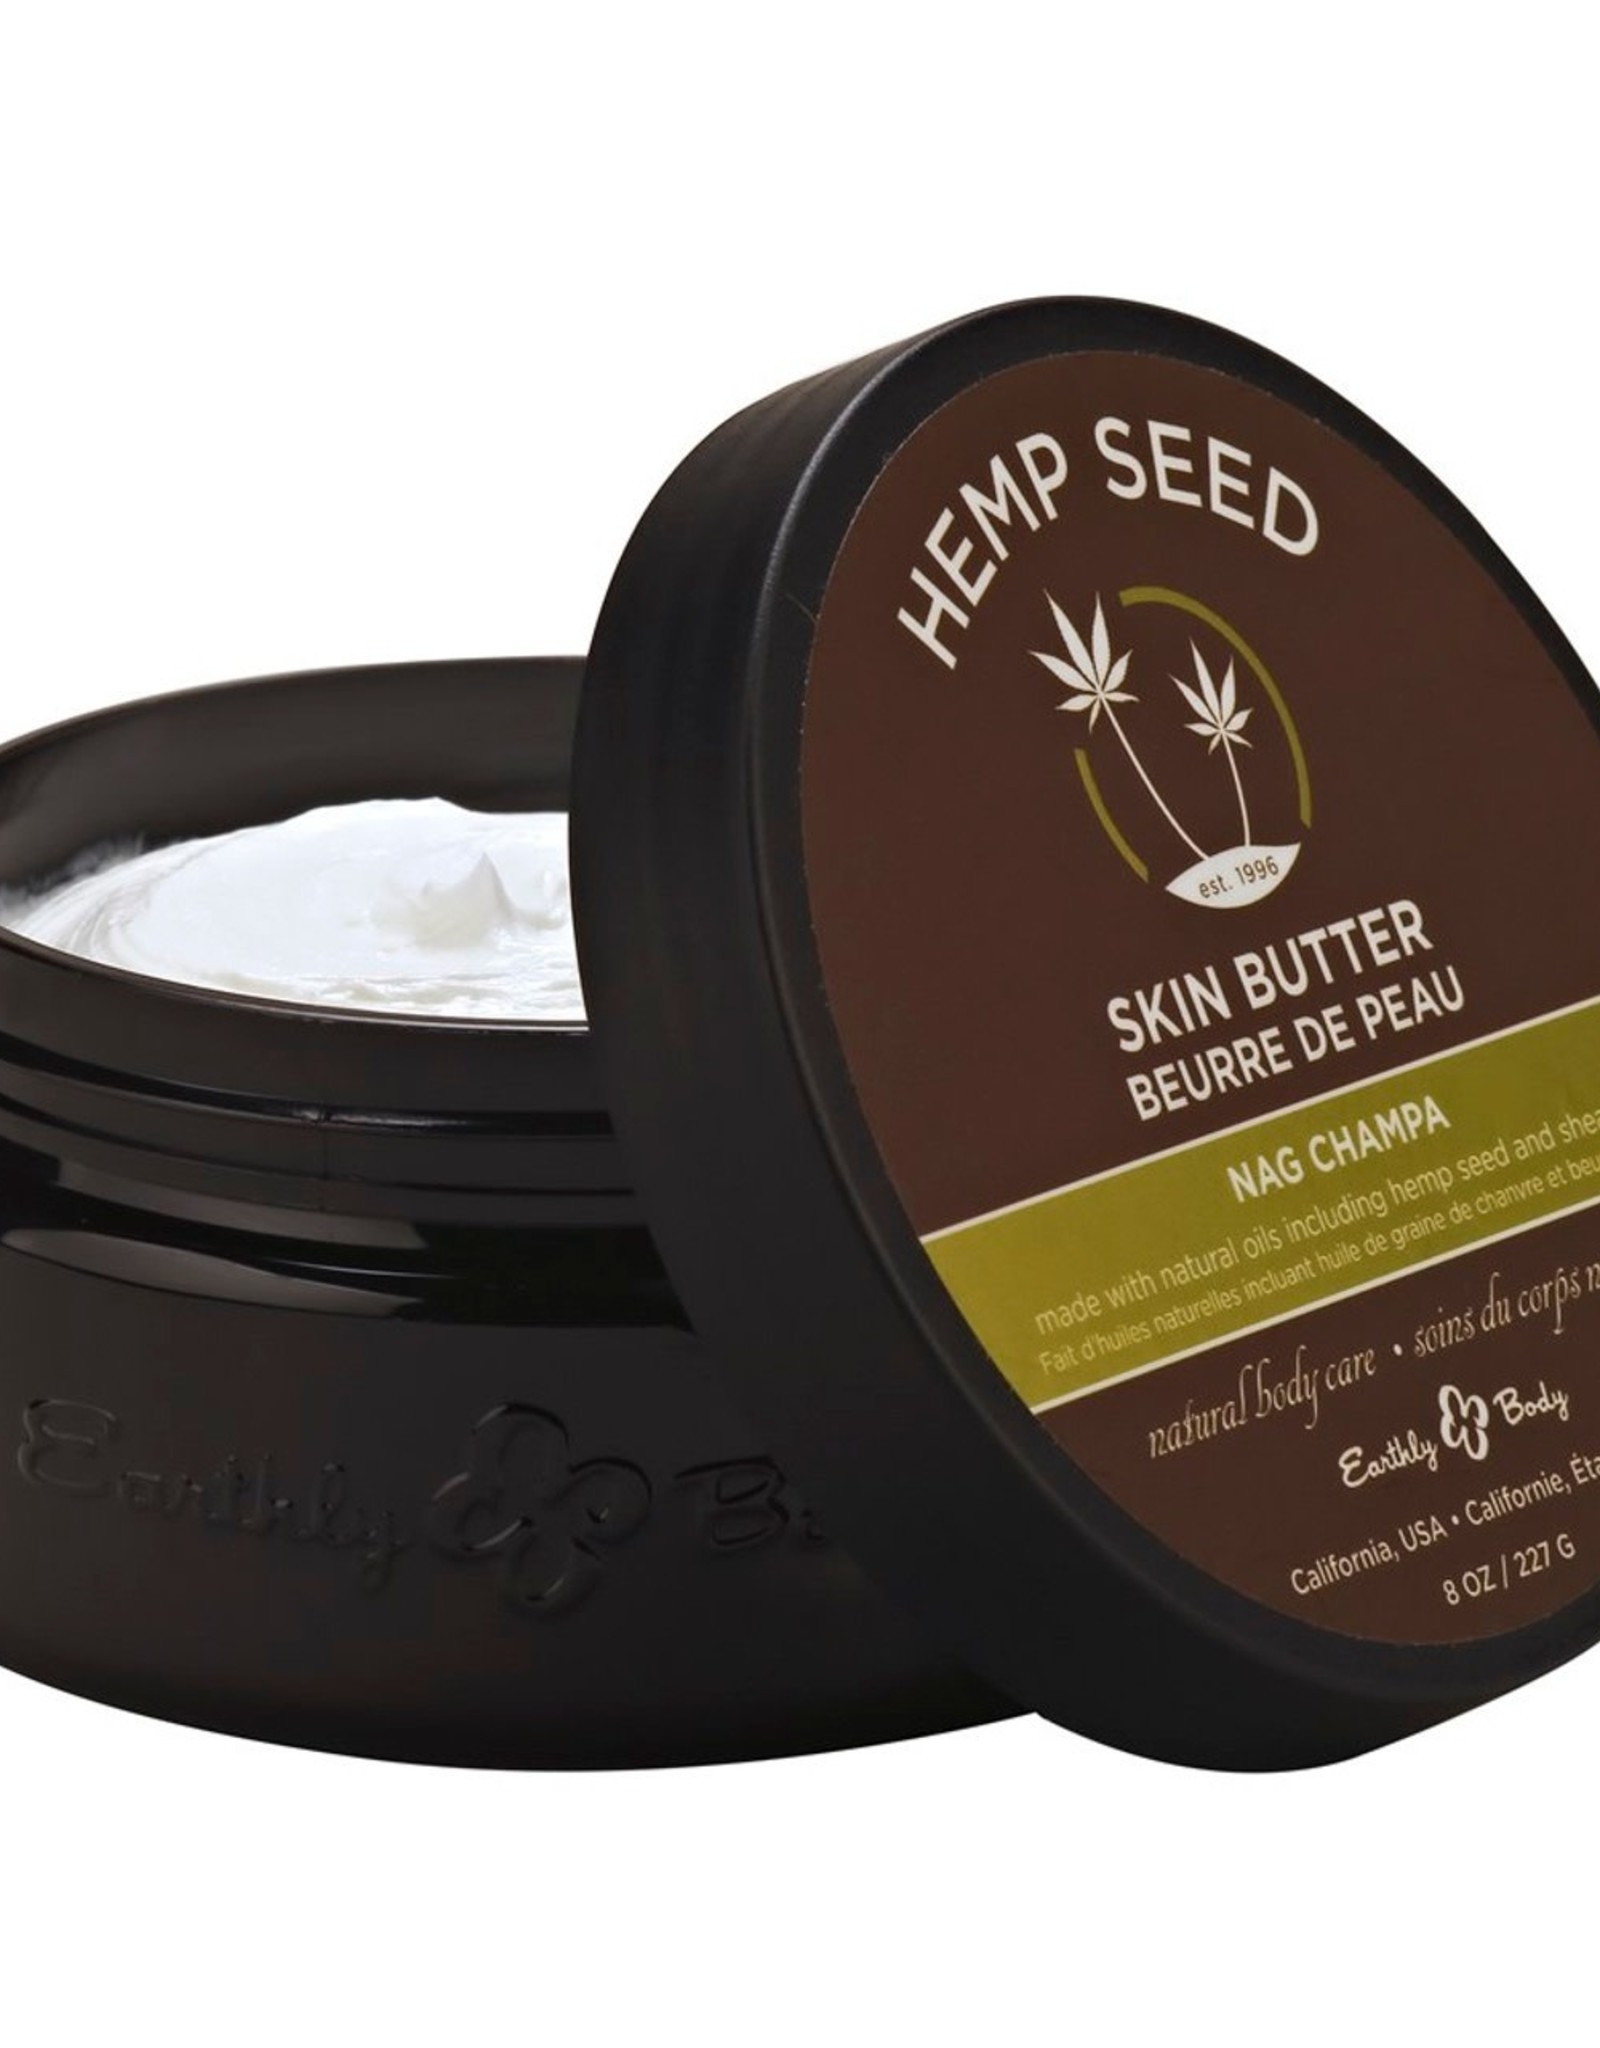 Earthly Body Nag Champa Skin Butter by Earthly Body